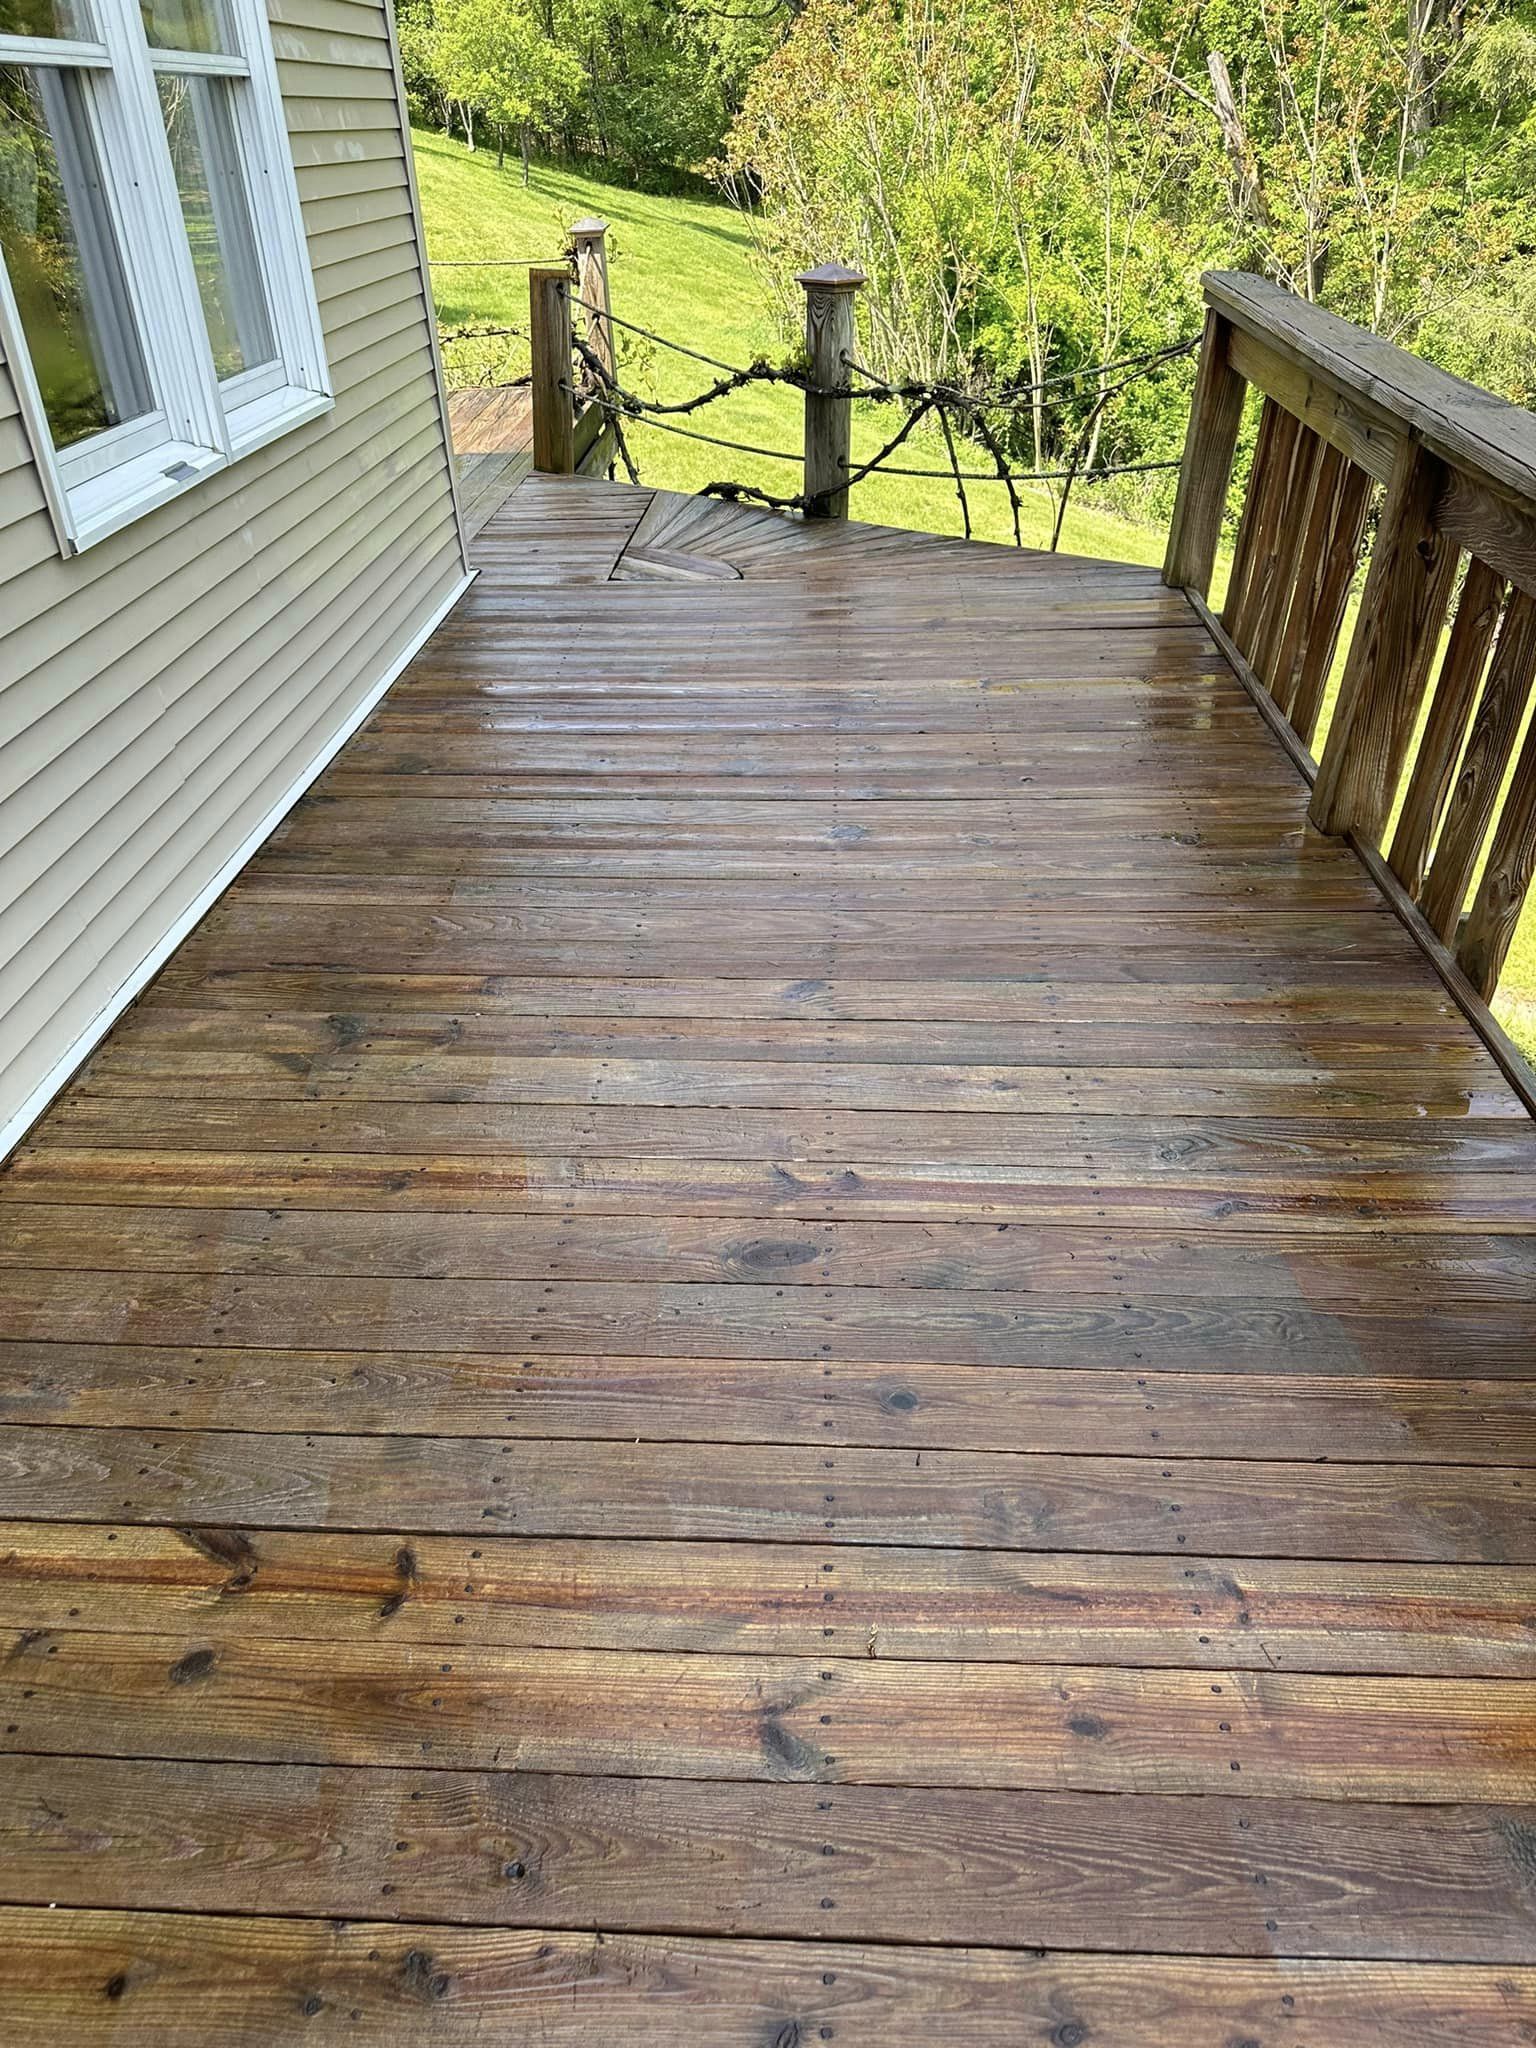 Expert pressure washing services for fence and deck cleaning in Watsontown PA by NextGen Power Wash LLC